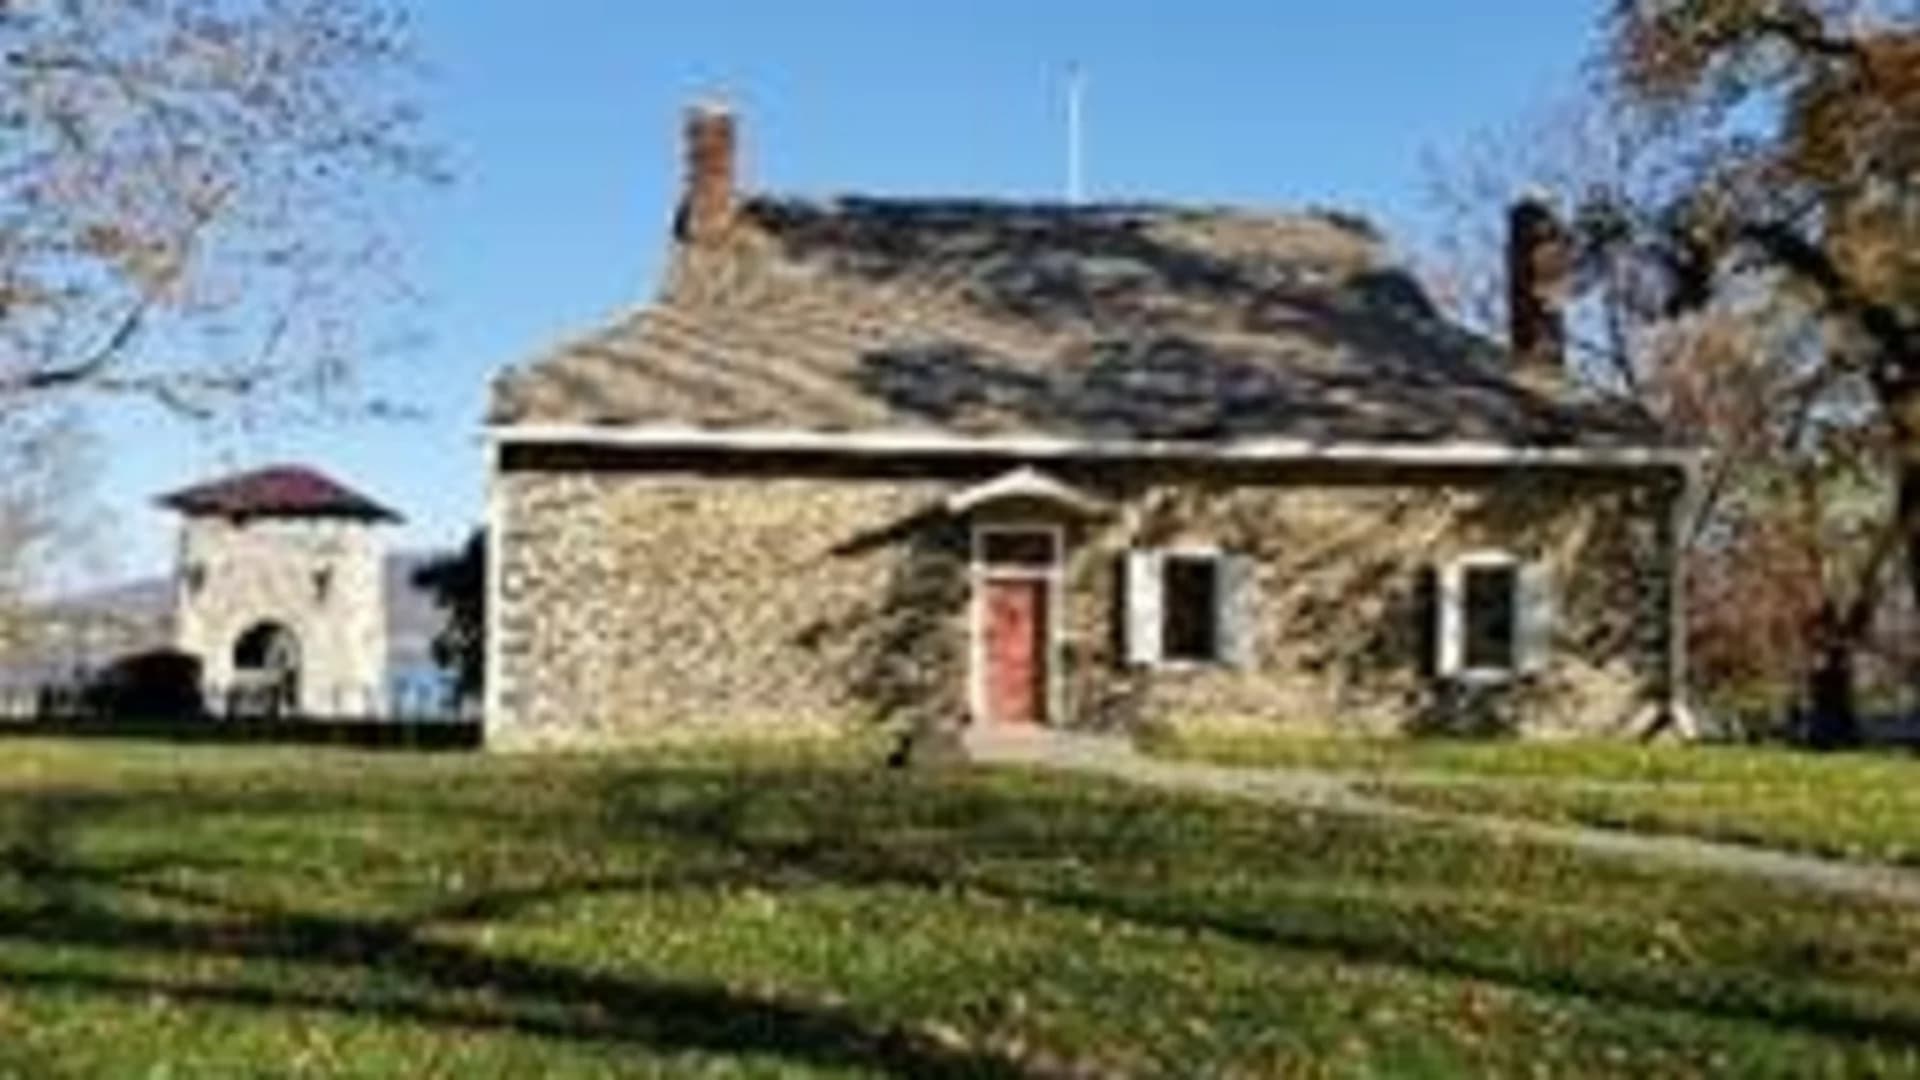 Washington’s Headquarters State Historic Site announces new hours for fall and winter 